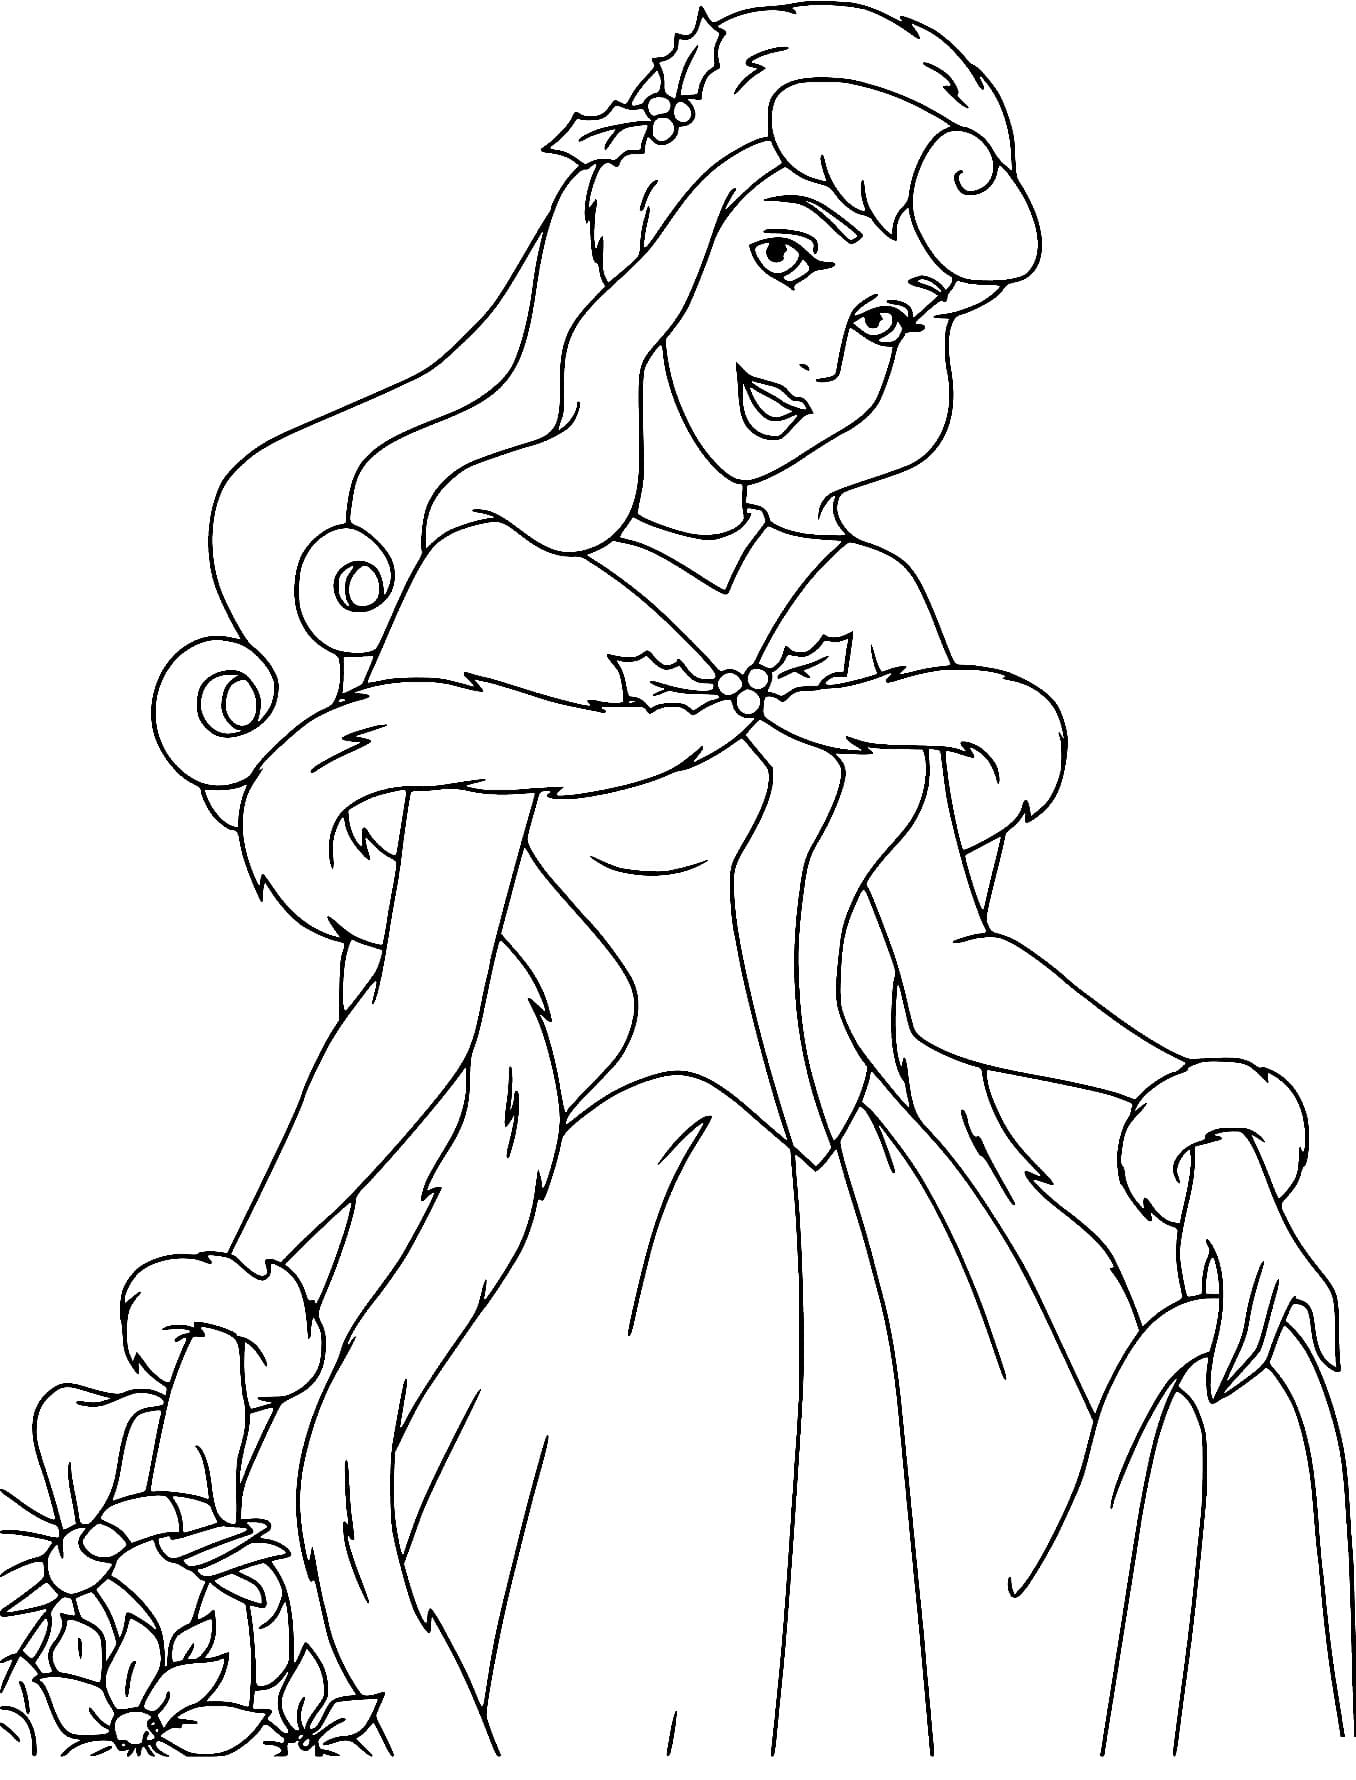 princess-aurora-on-christmas-coloring-page-download-print-or-color